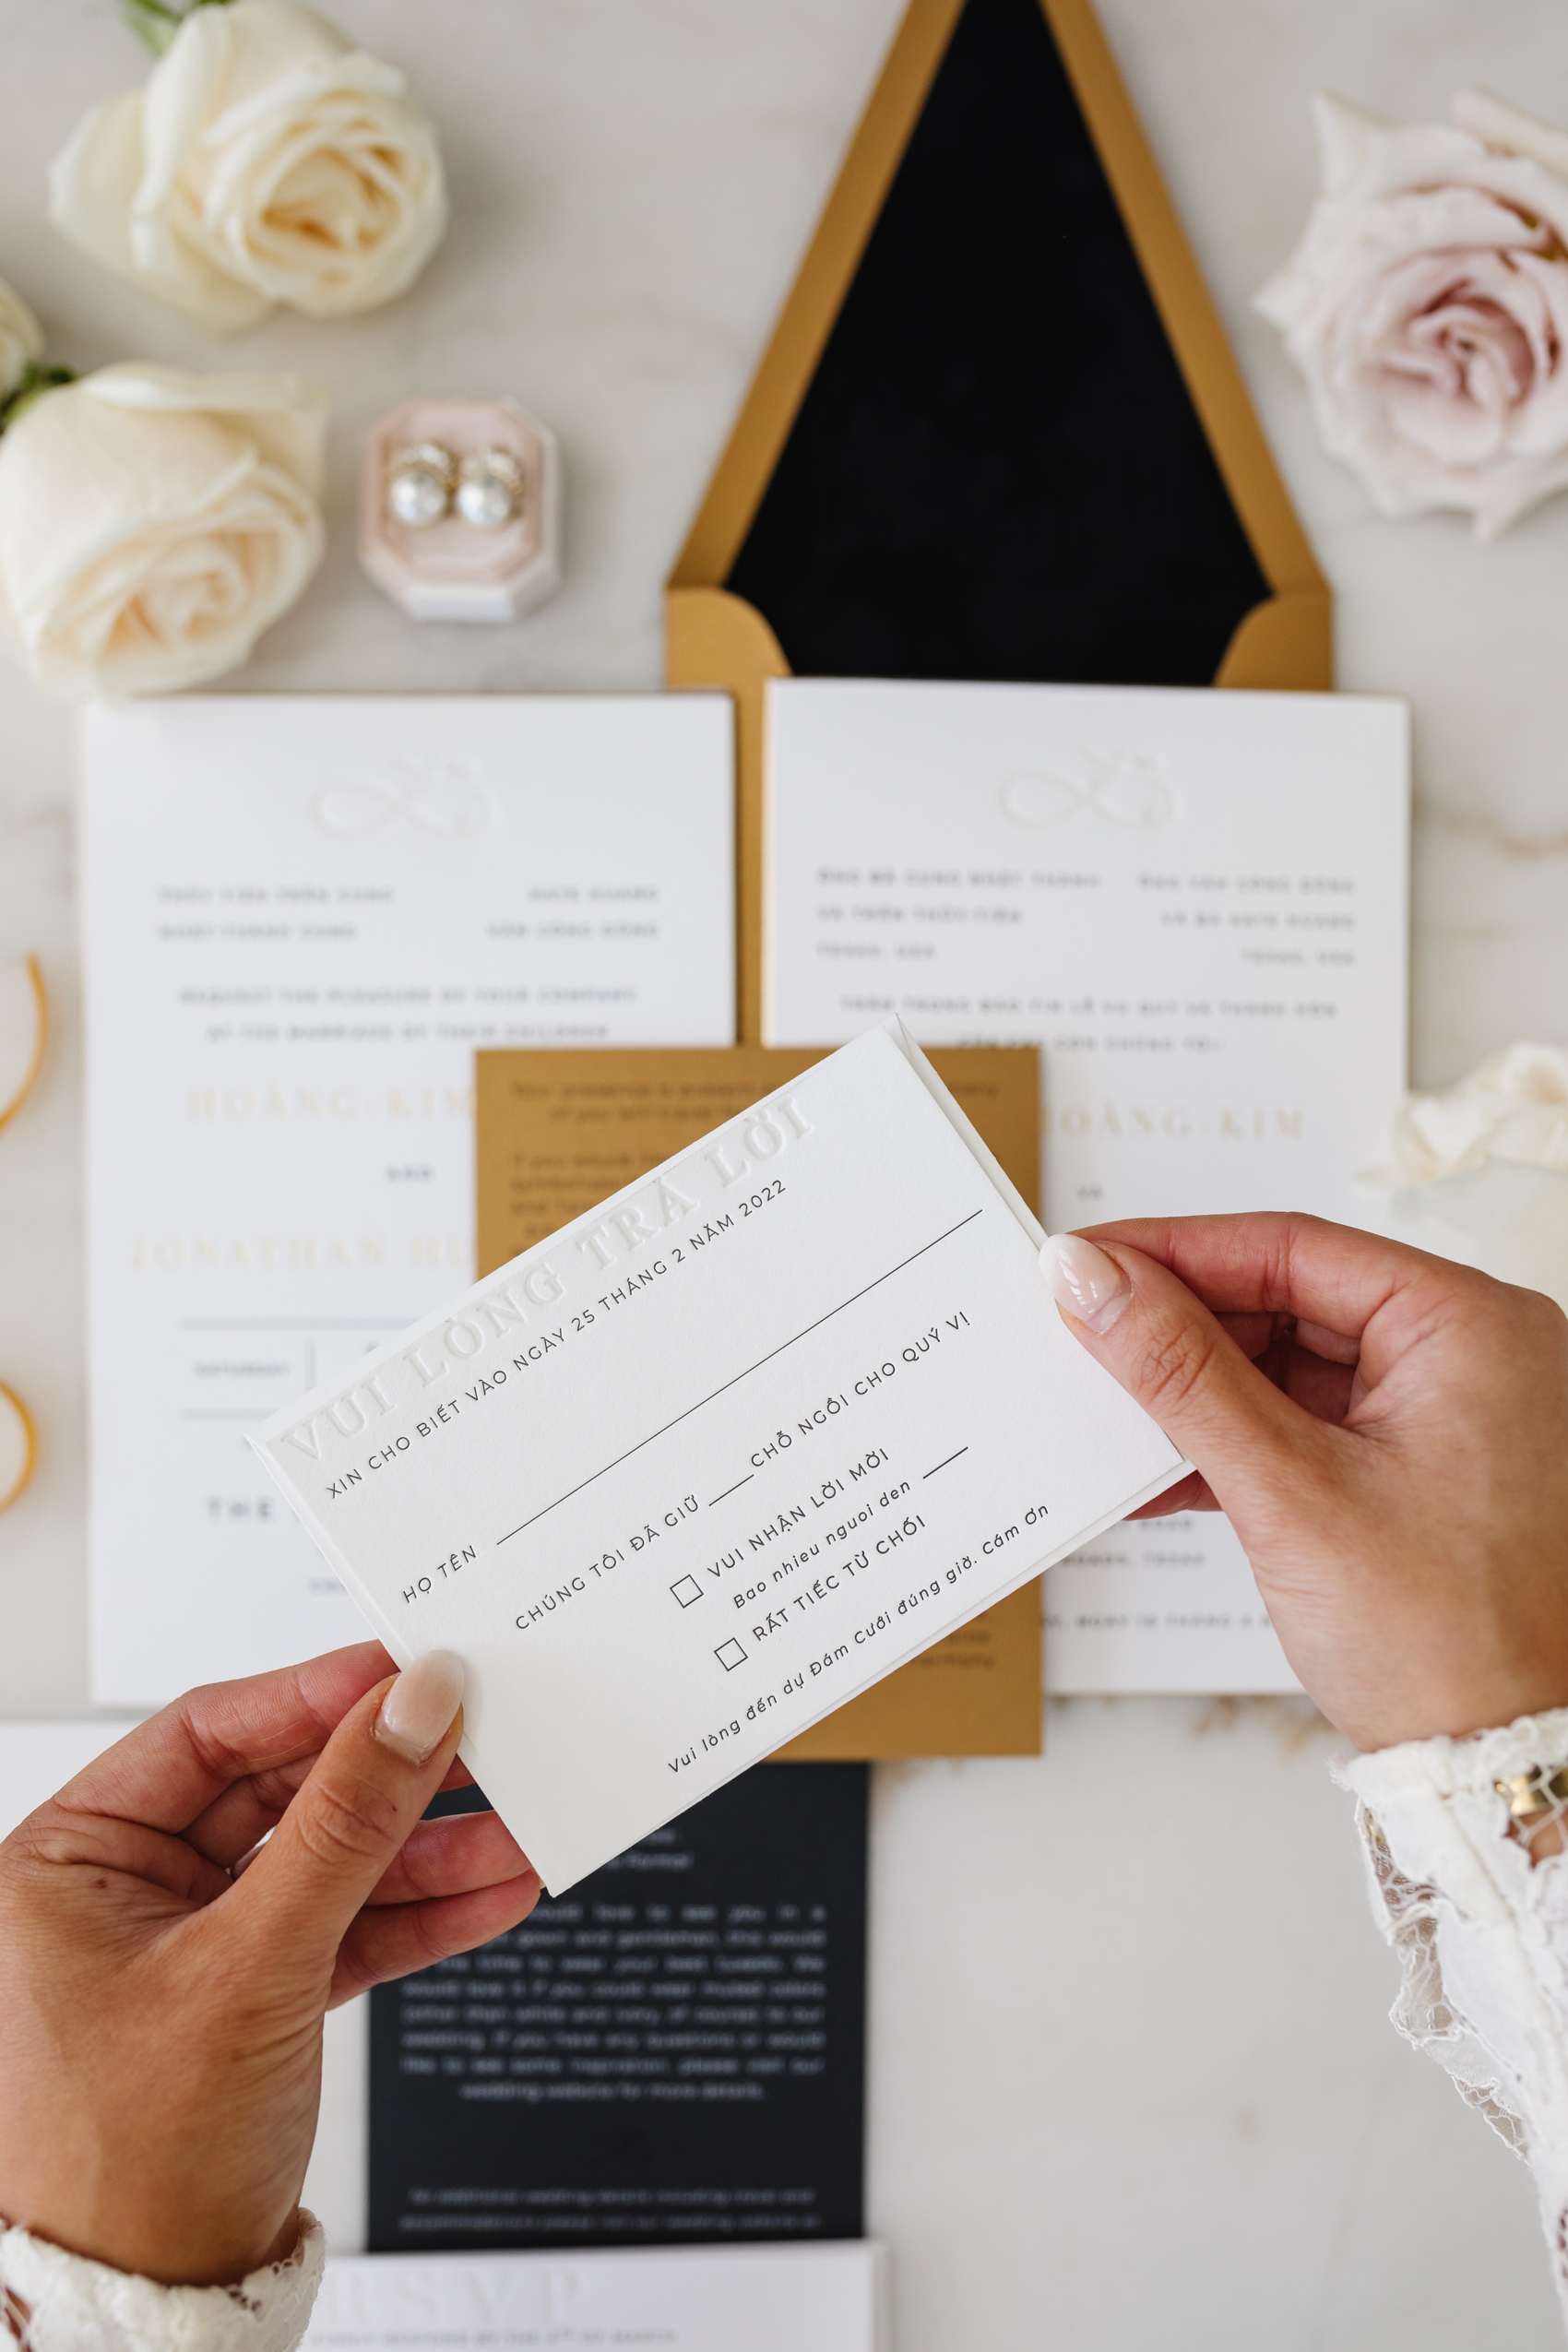 Blogger Hoang-Kim Cung's custom wedding invitations with letterpressed wedding response cards and envelopes